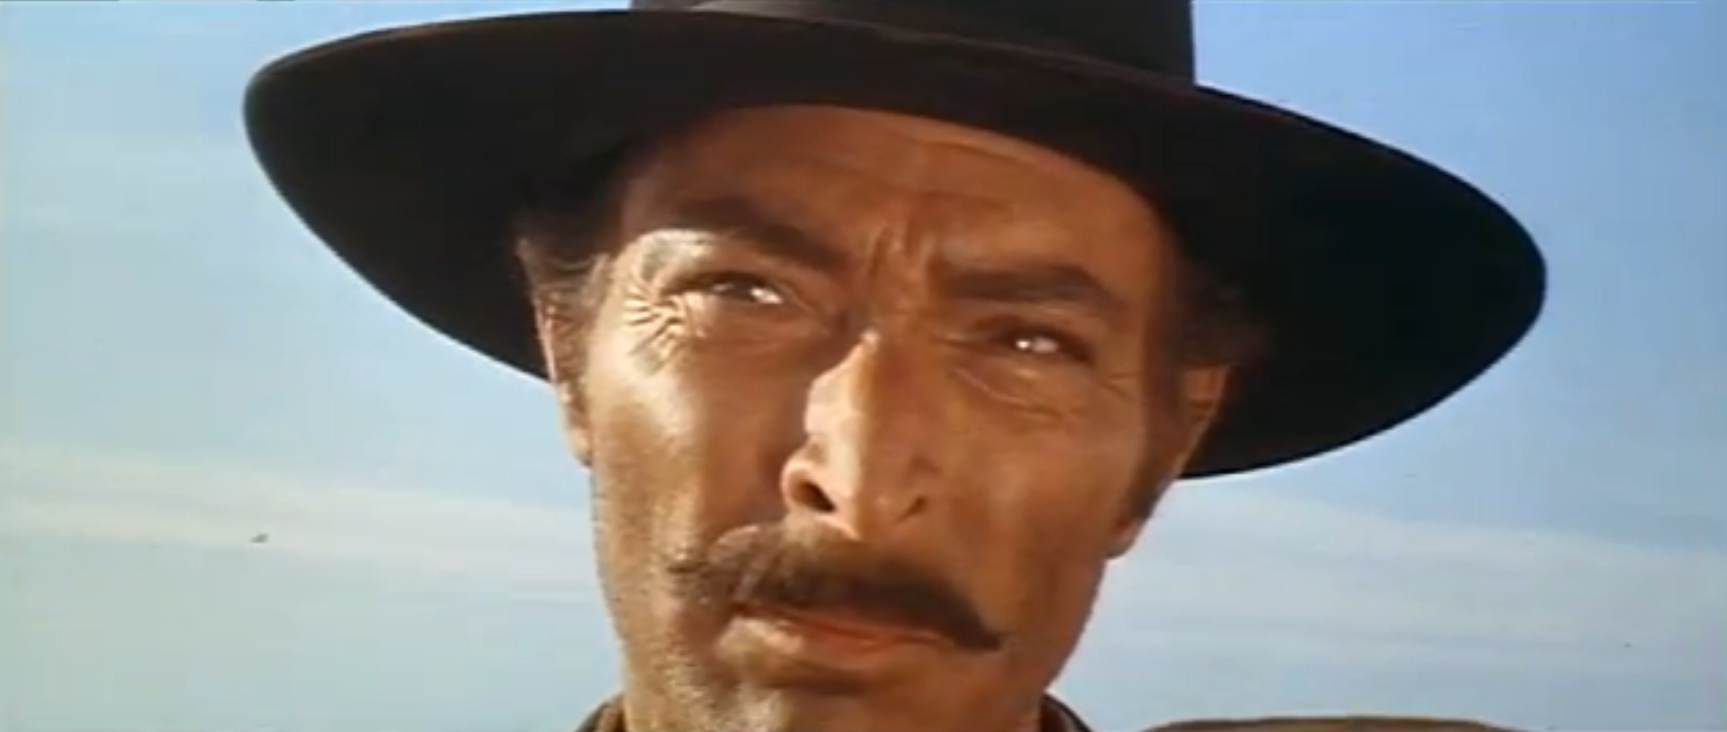 Screen Shot from The Good, The Bad and The Ugly